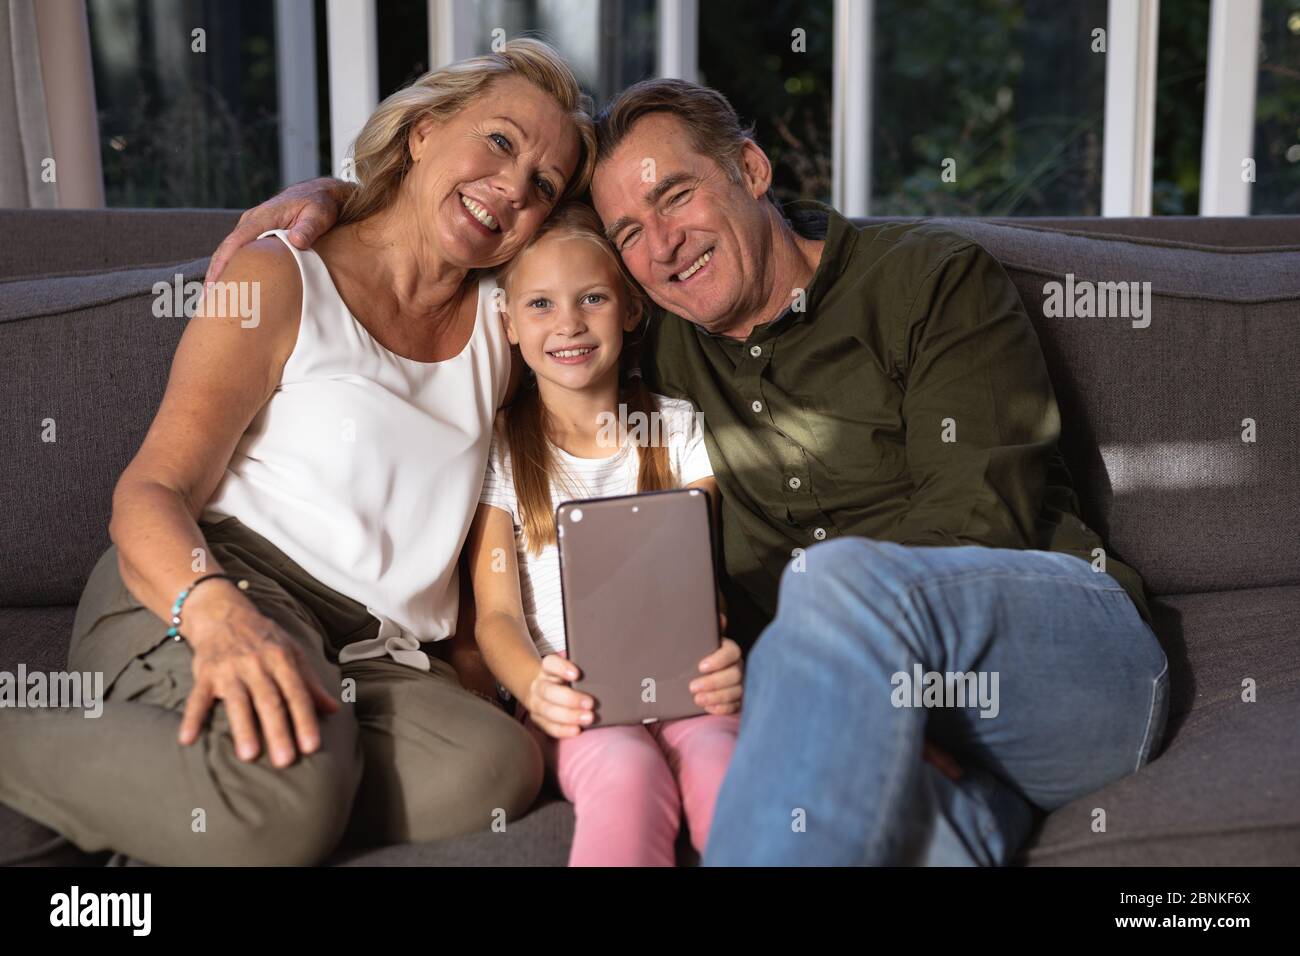 Portrait of a Caucasian girl and her grandparent using a digital tablet on a couch Stock Photo